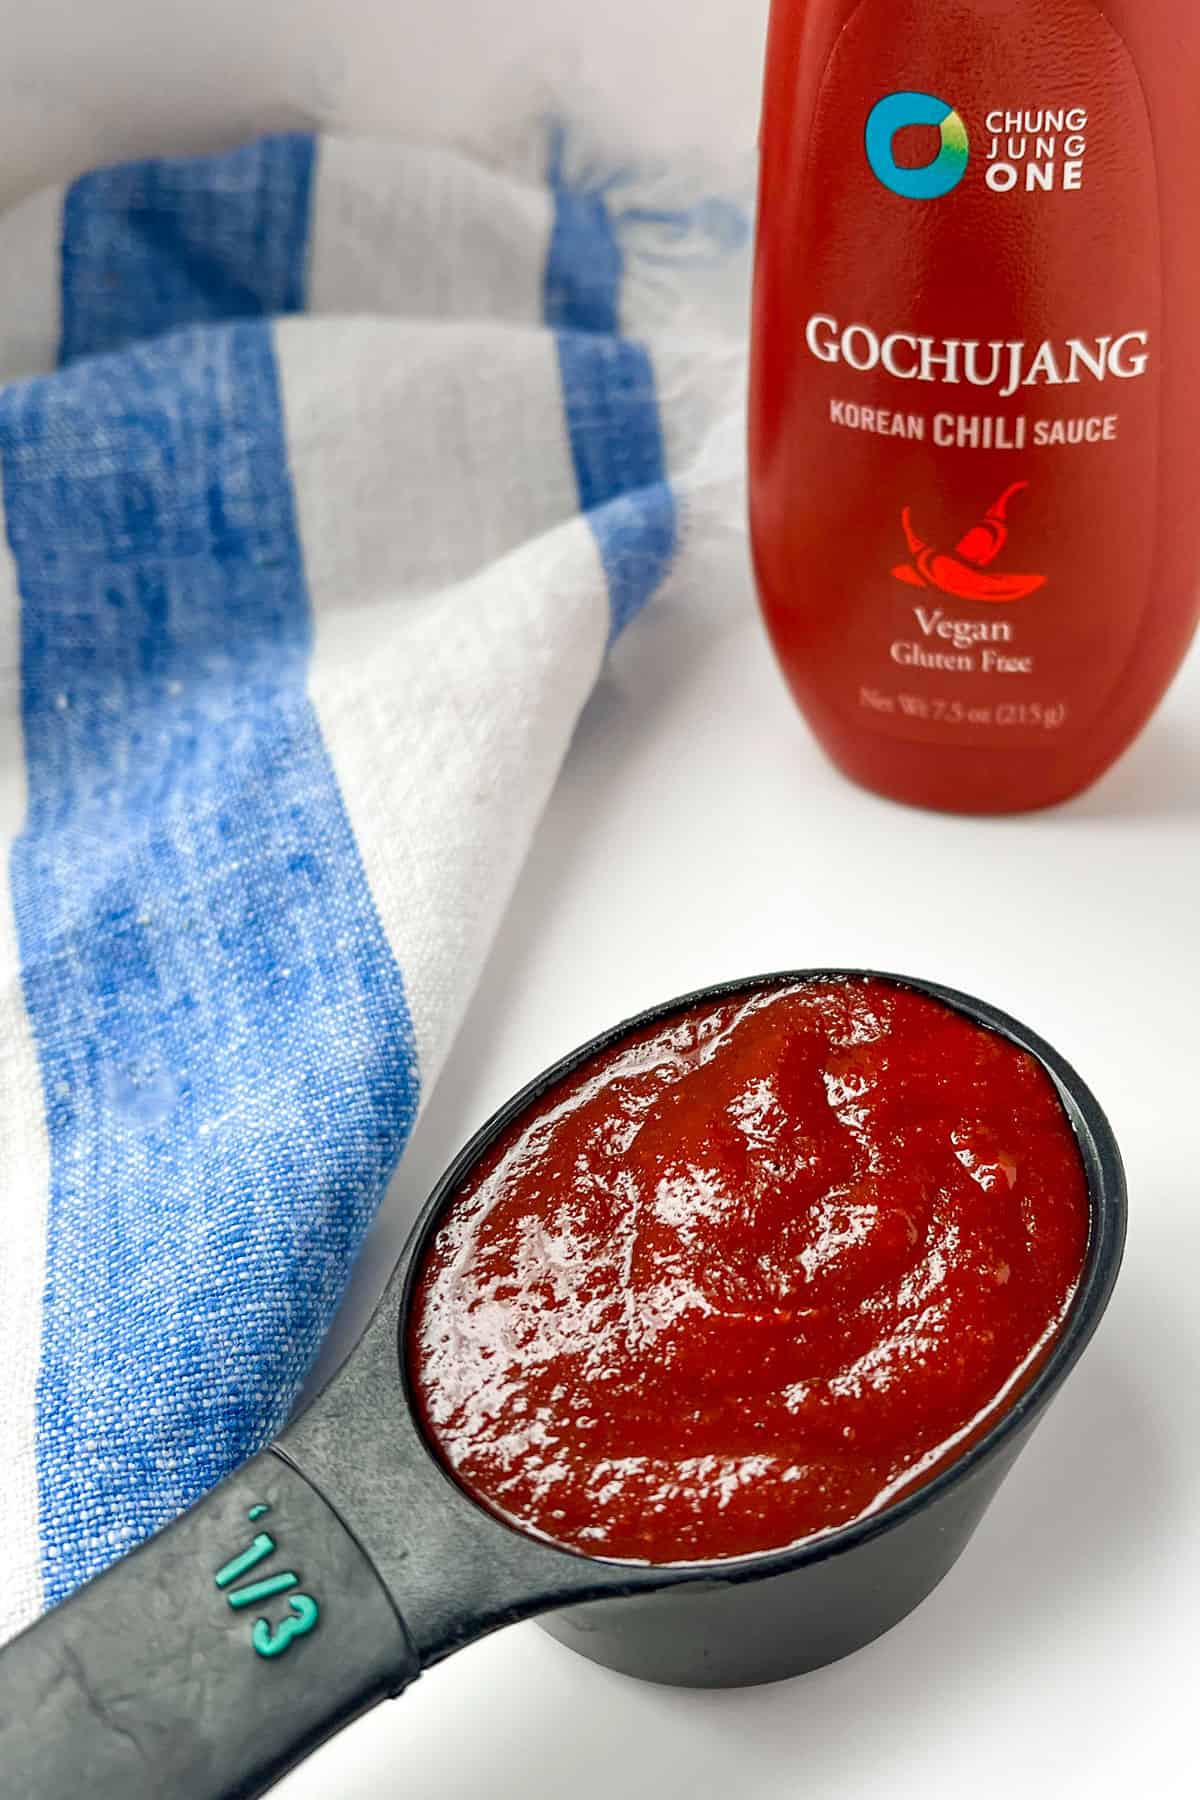 small black measuring spoon holding ⅓ cup of Korean gochujang sauce, with the bottle of the sauce in the background